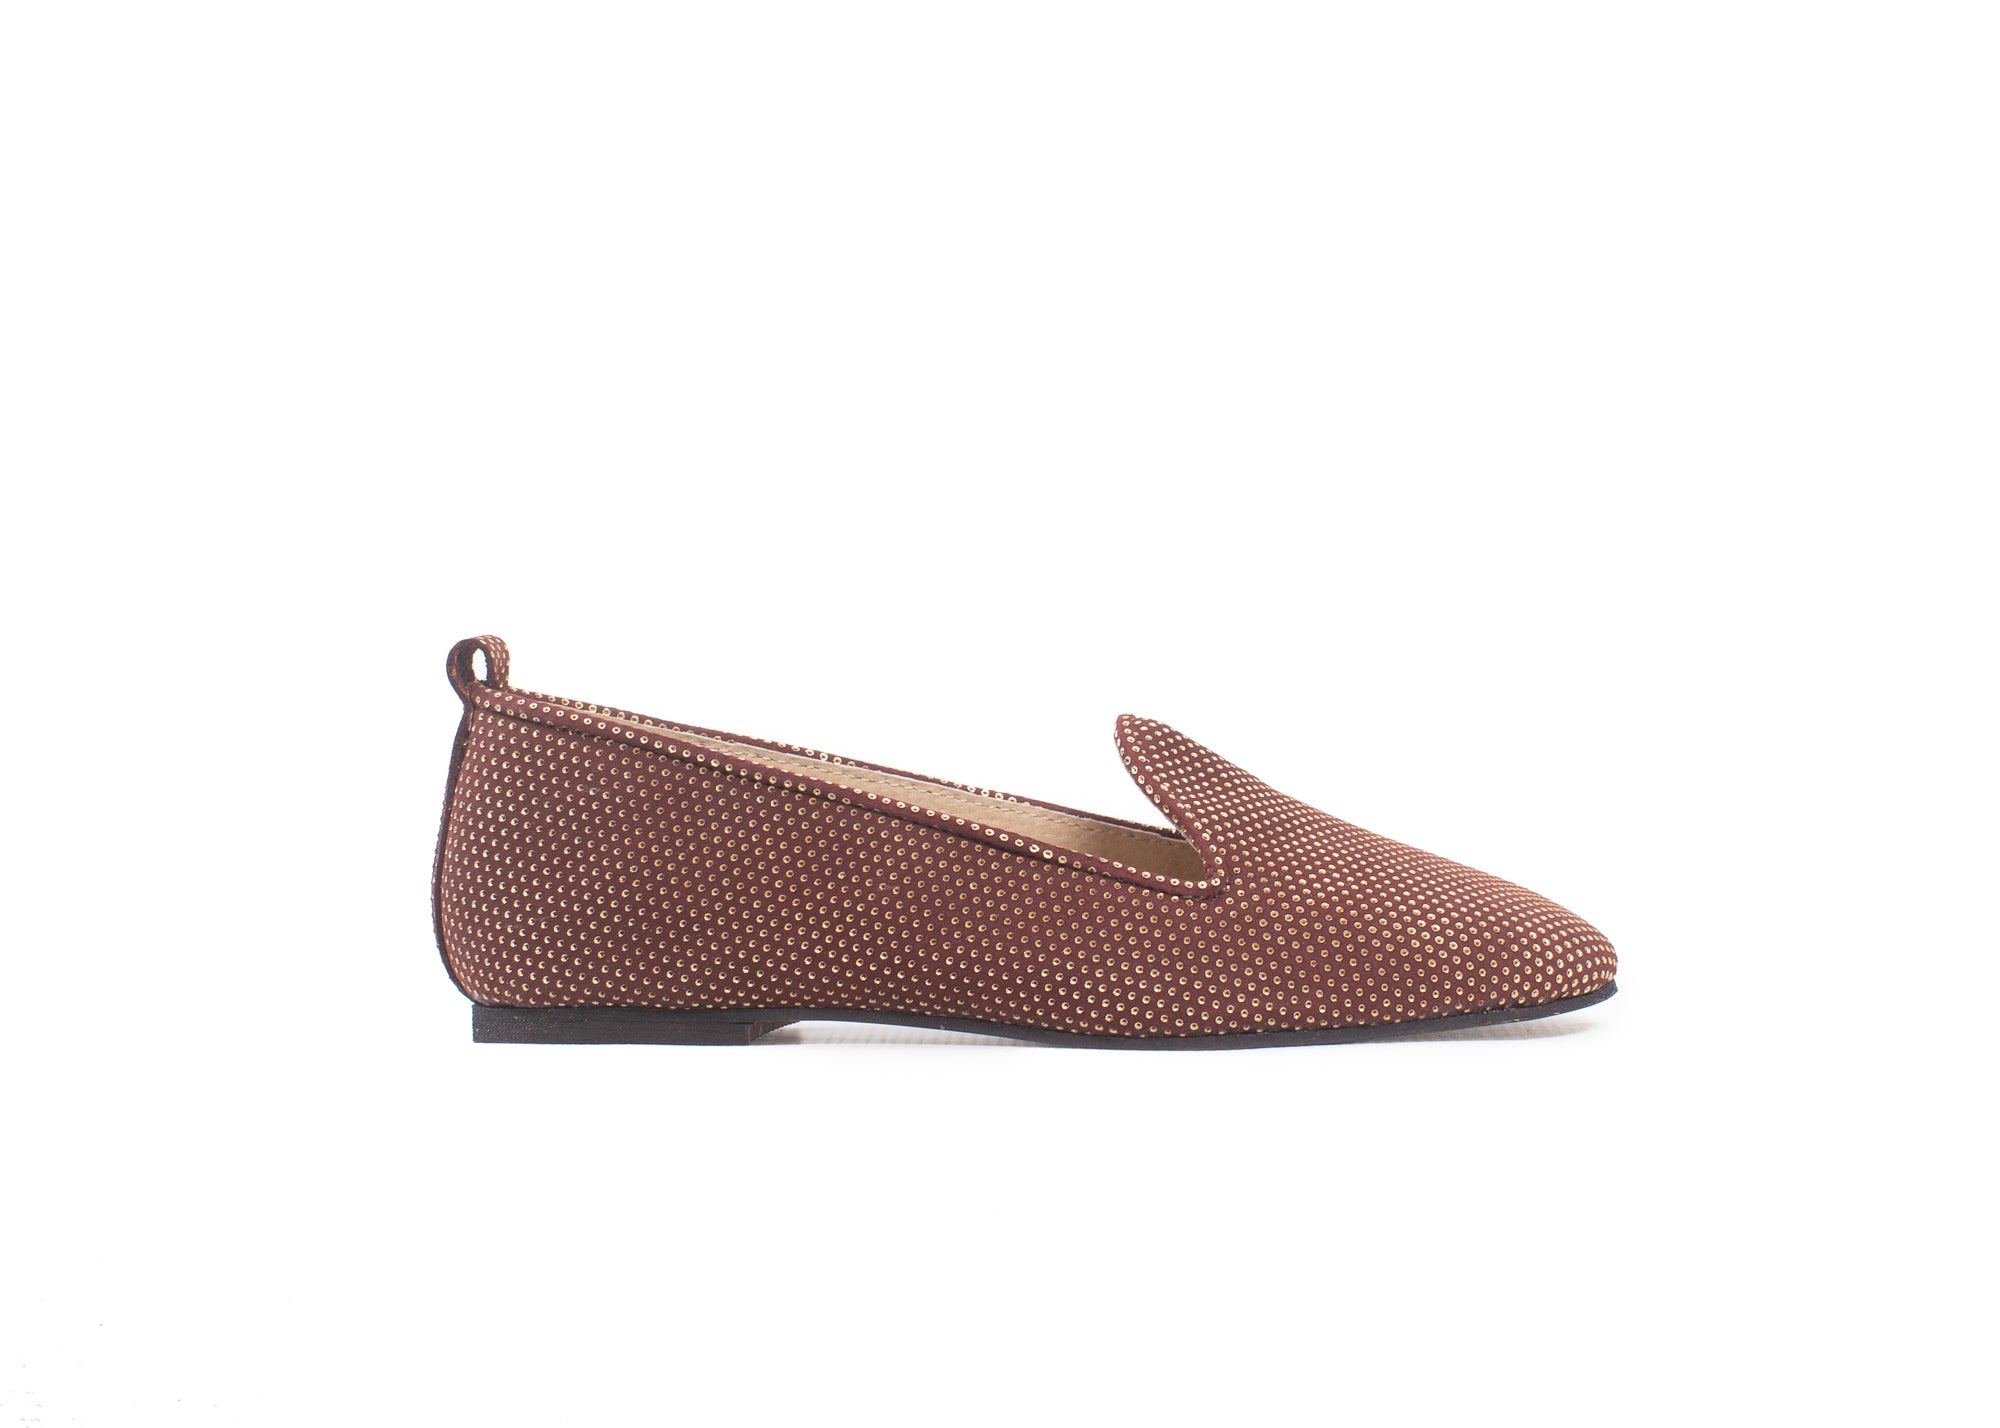 Round loafer - chocolate brown leather elegance